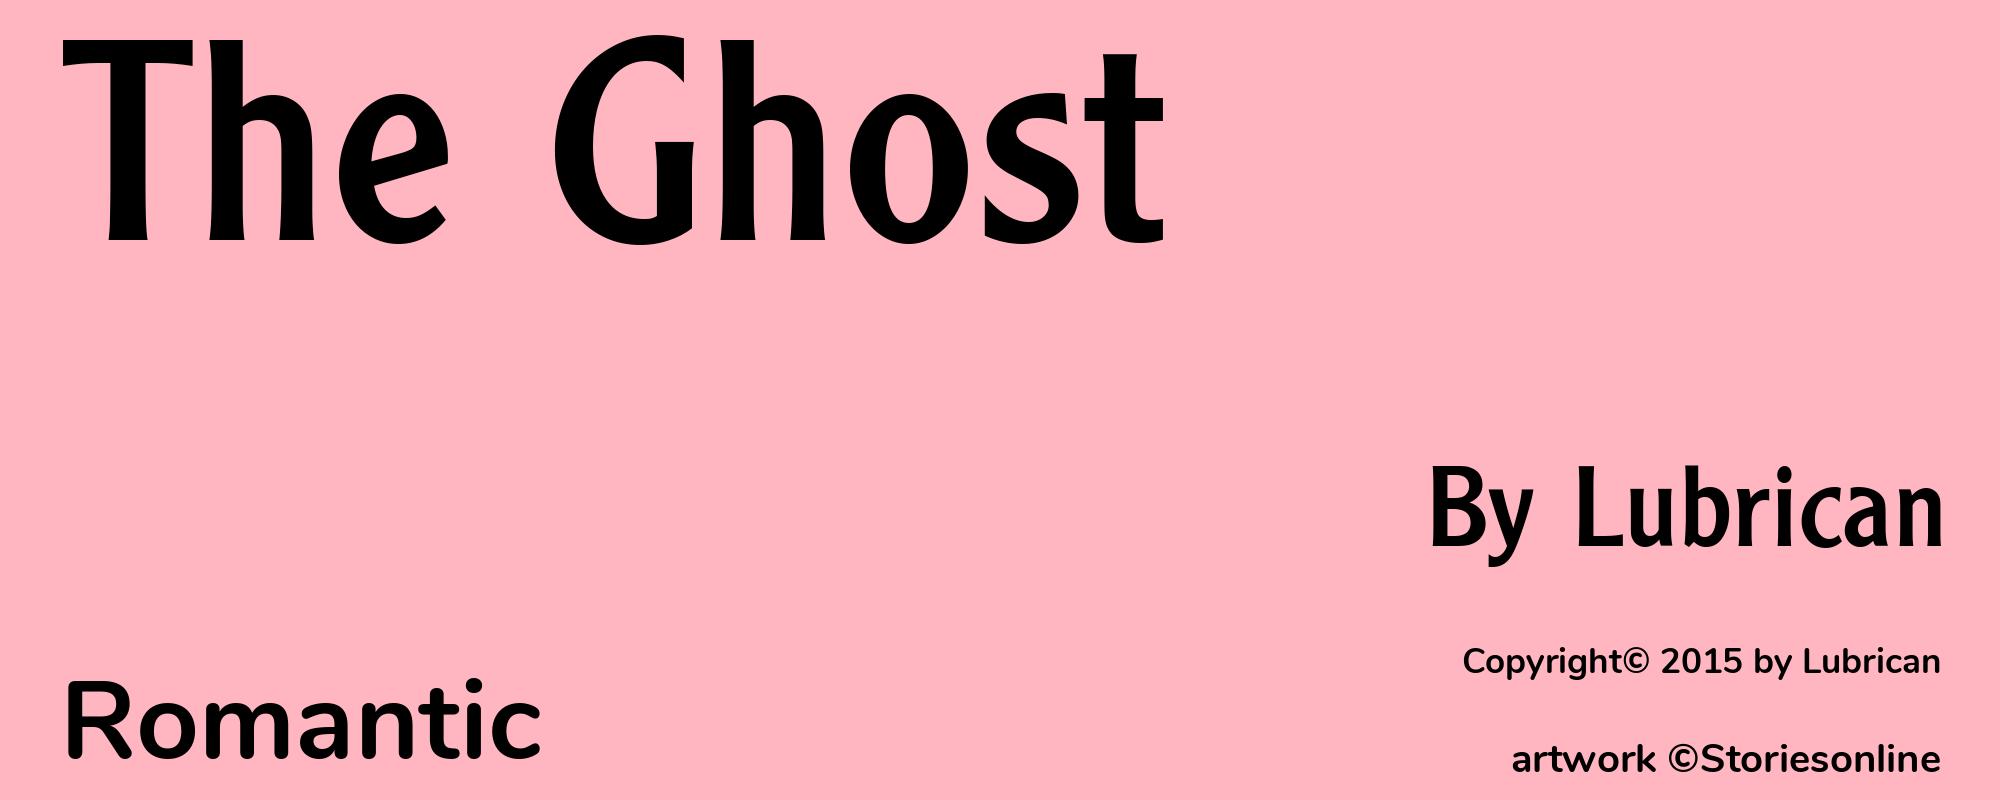 The Ghost - Cover